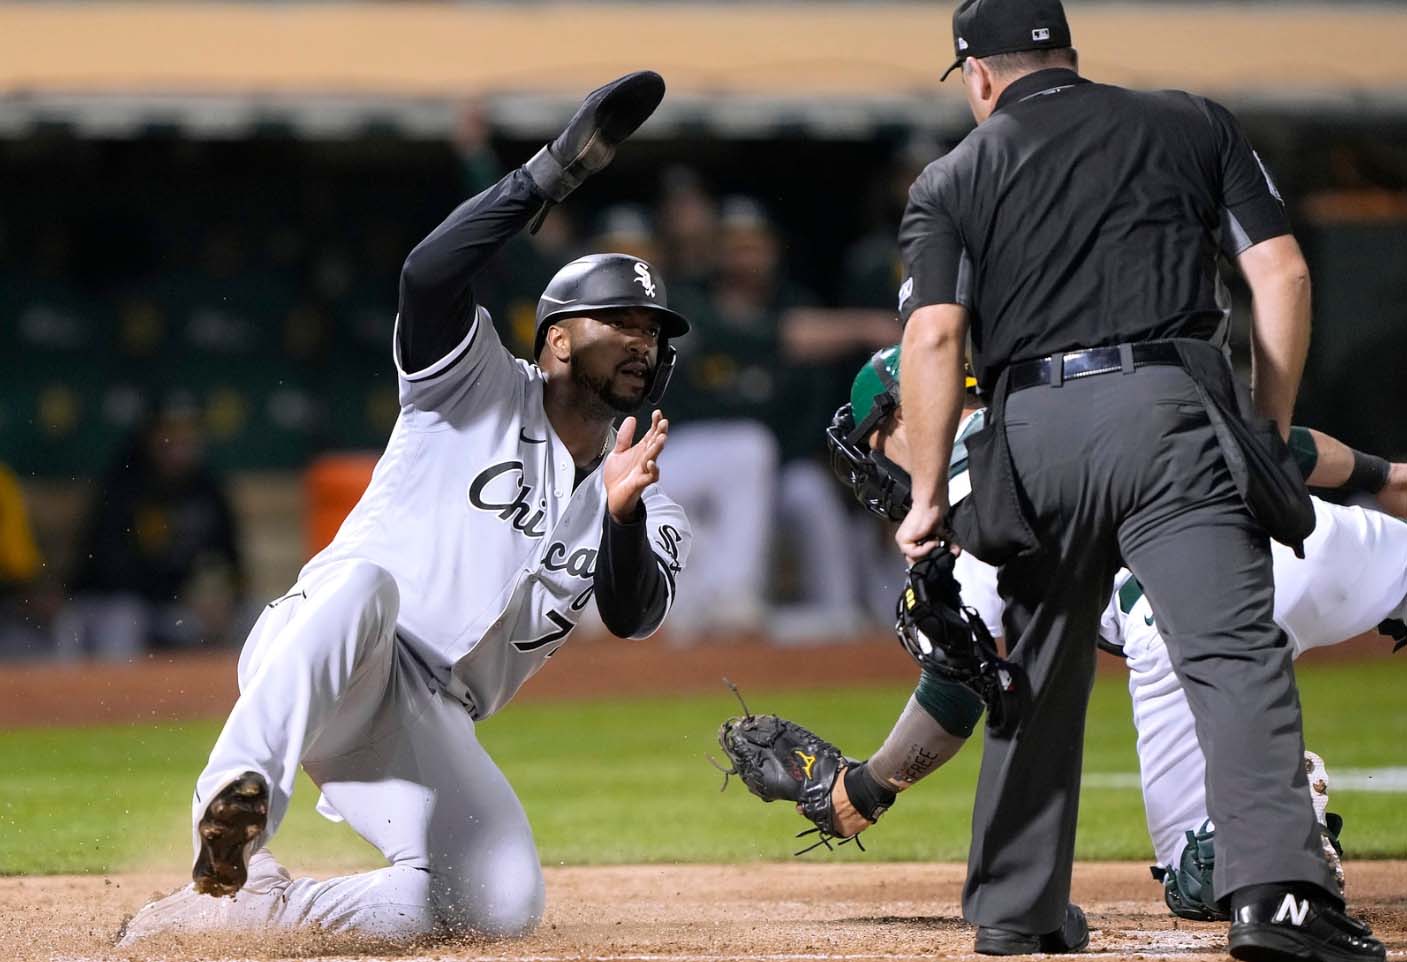 White Sox beat A's 6-3; Oakland drops fourth straight game